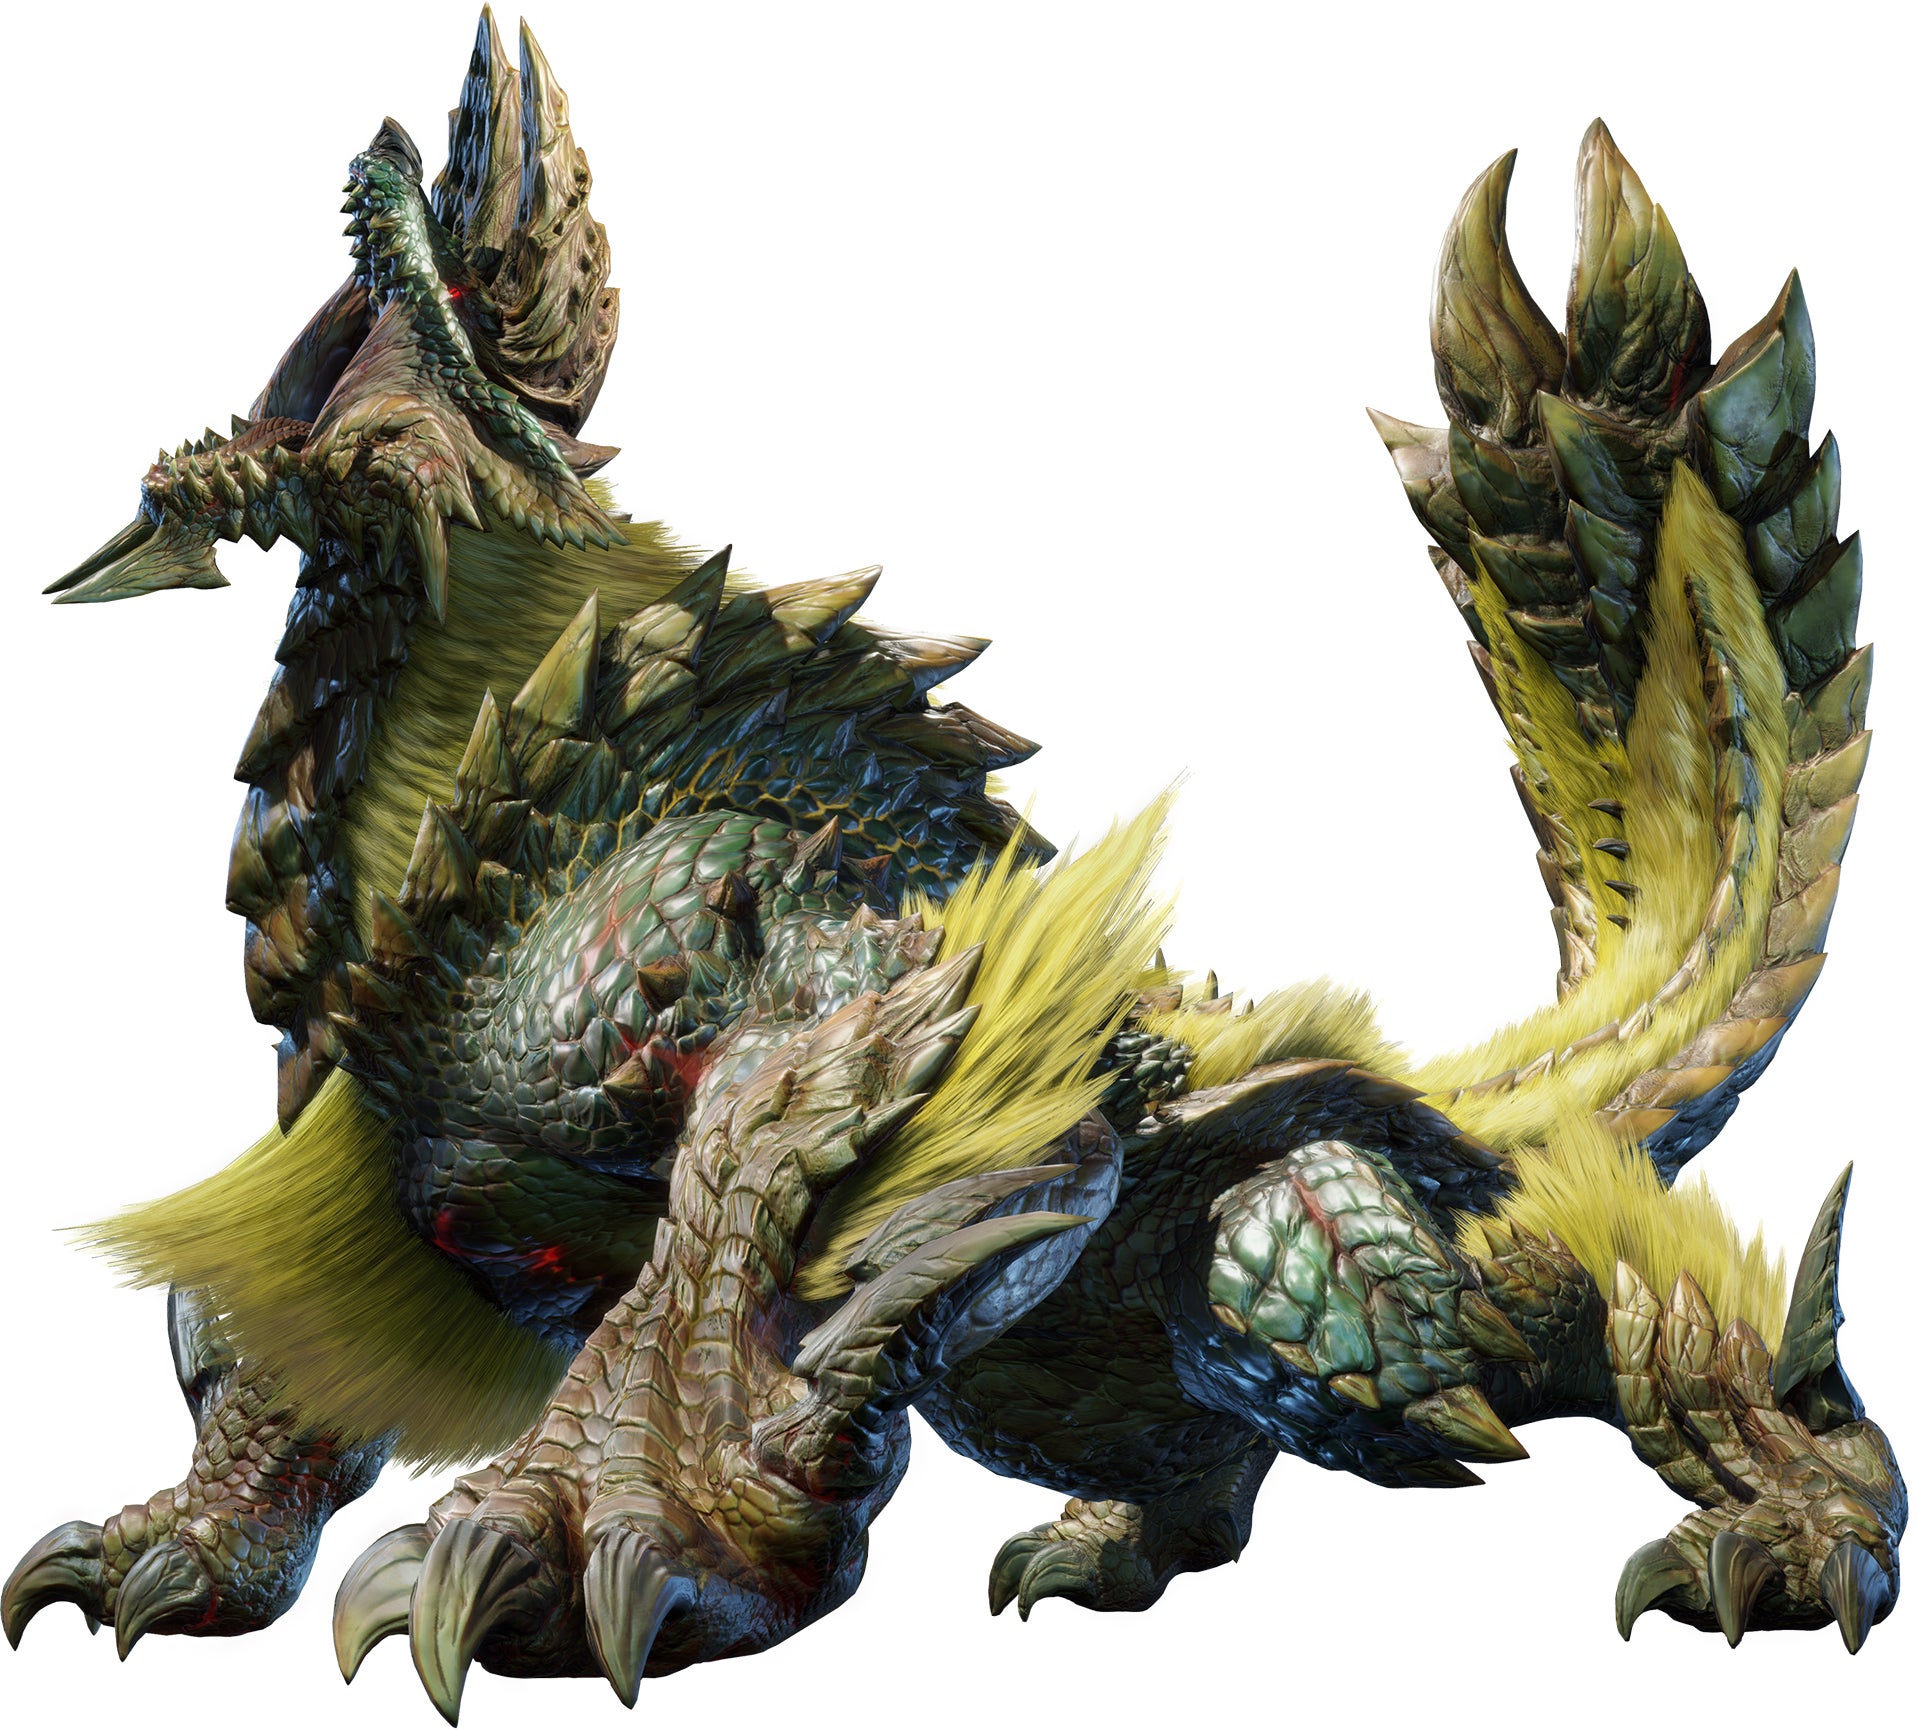 Monster Hunter Rise Update 3.0 Adds More Monsters And A New Ending